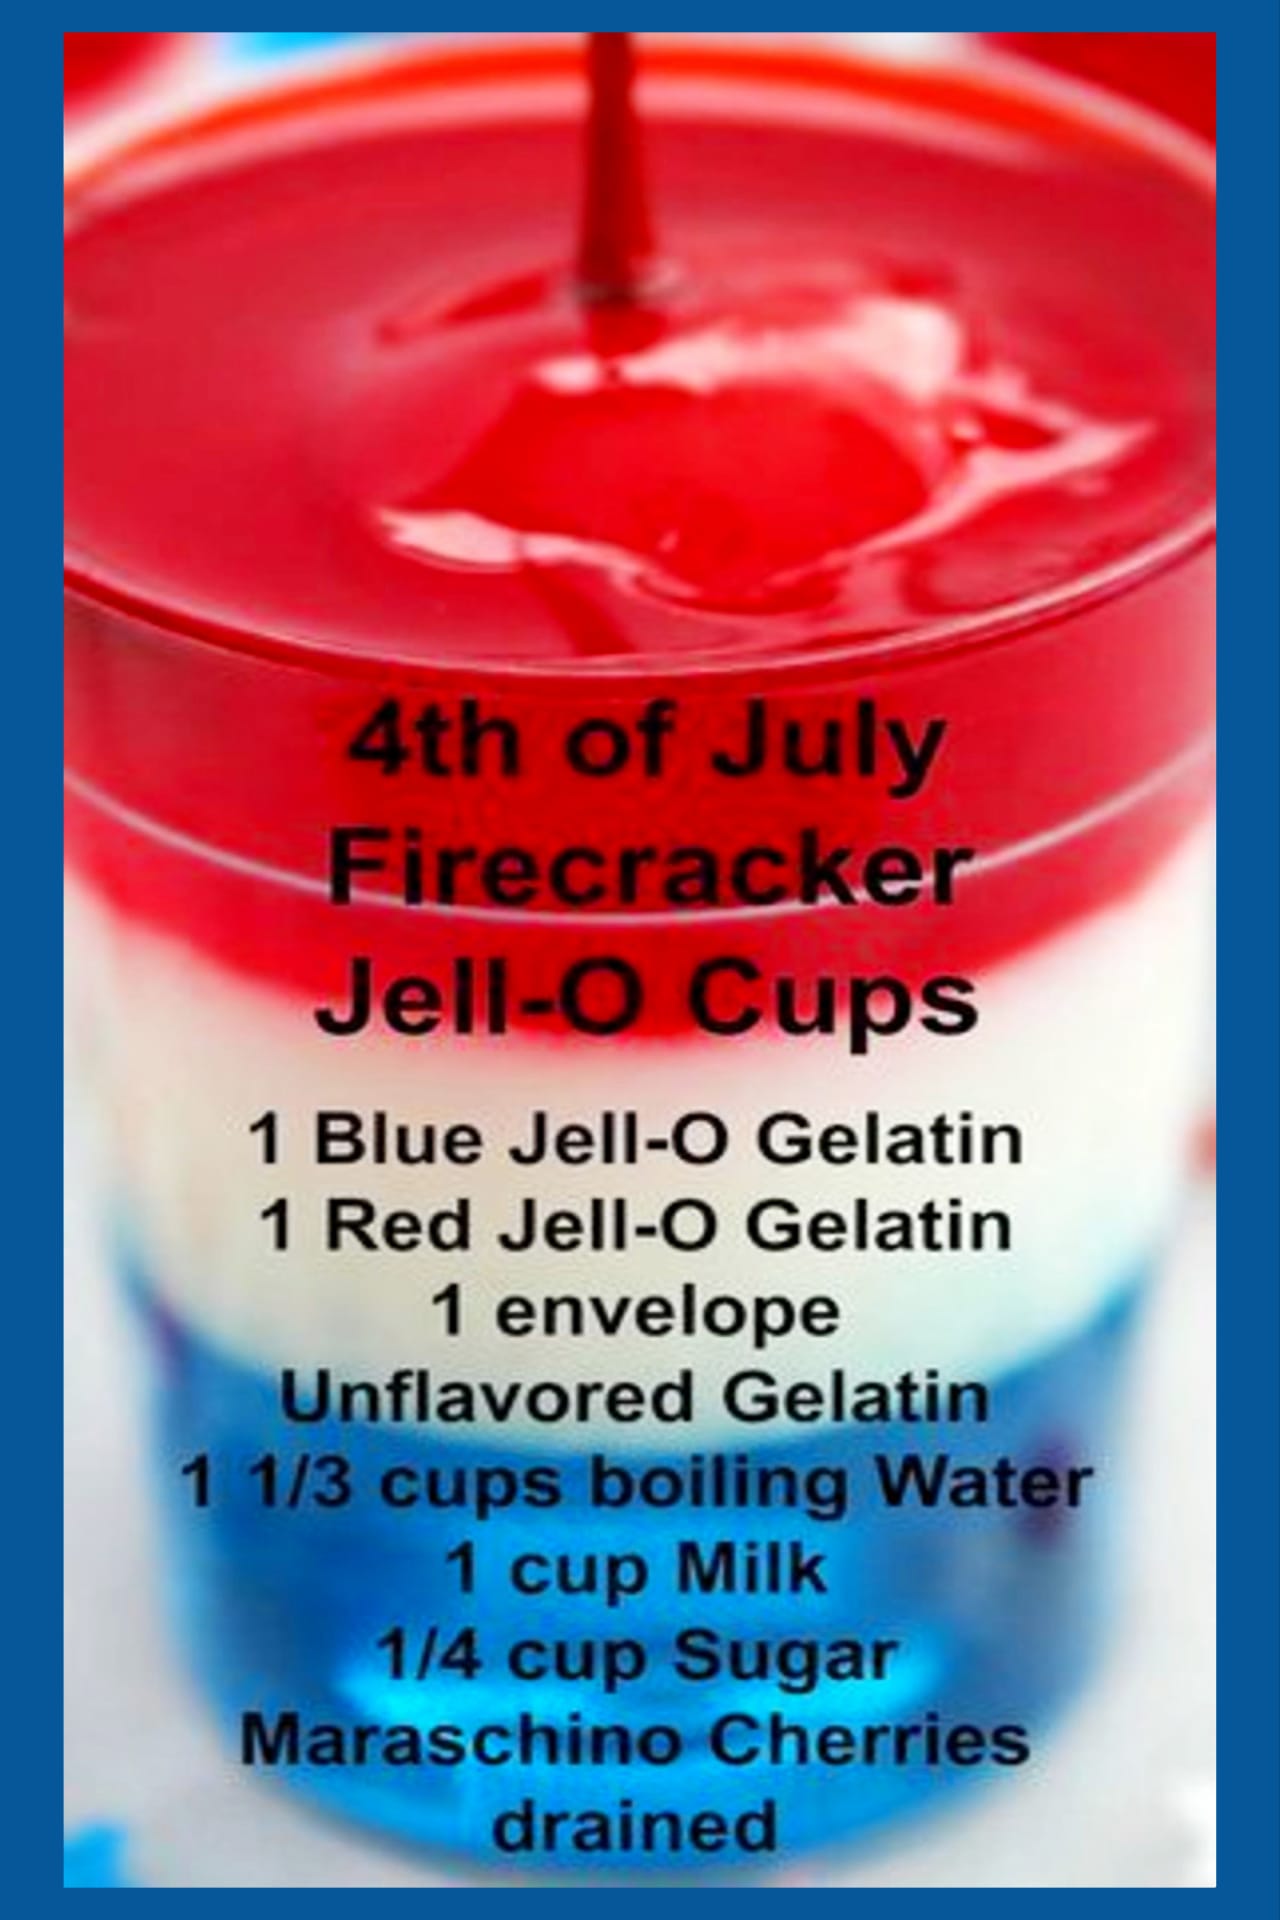 4th of July party ideas - easy desserts for the kids or for a crowd at your 4th of July BBQ cookout, backyard party or neighborhood block party